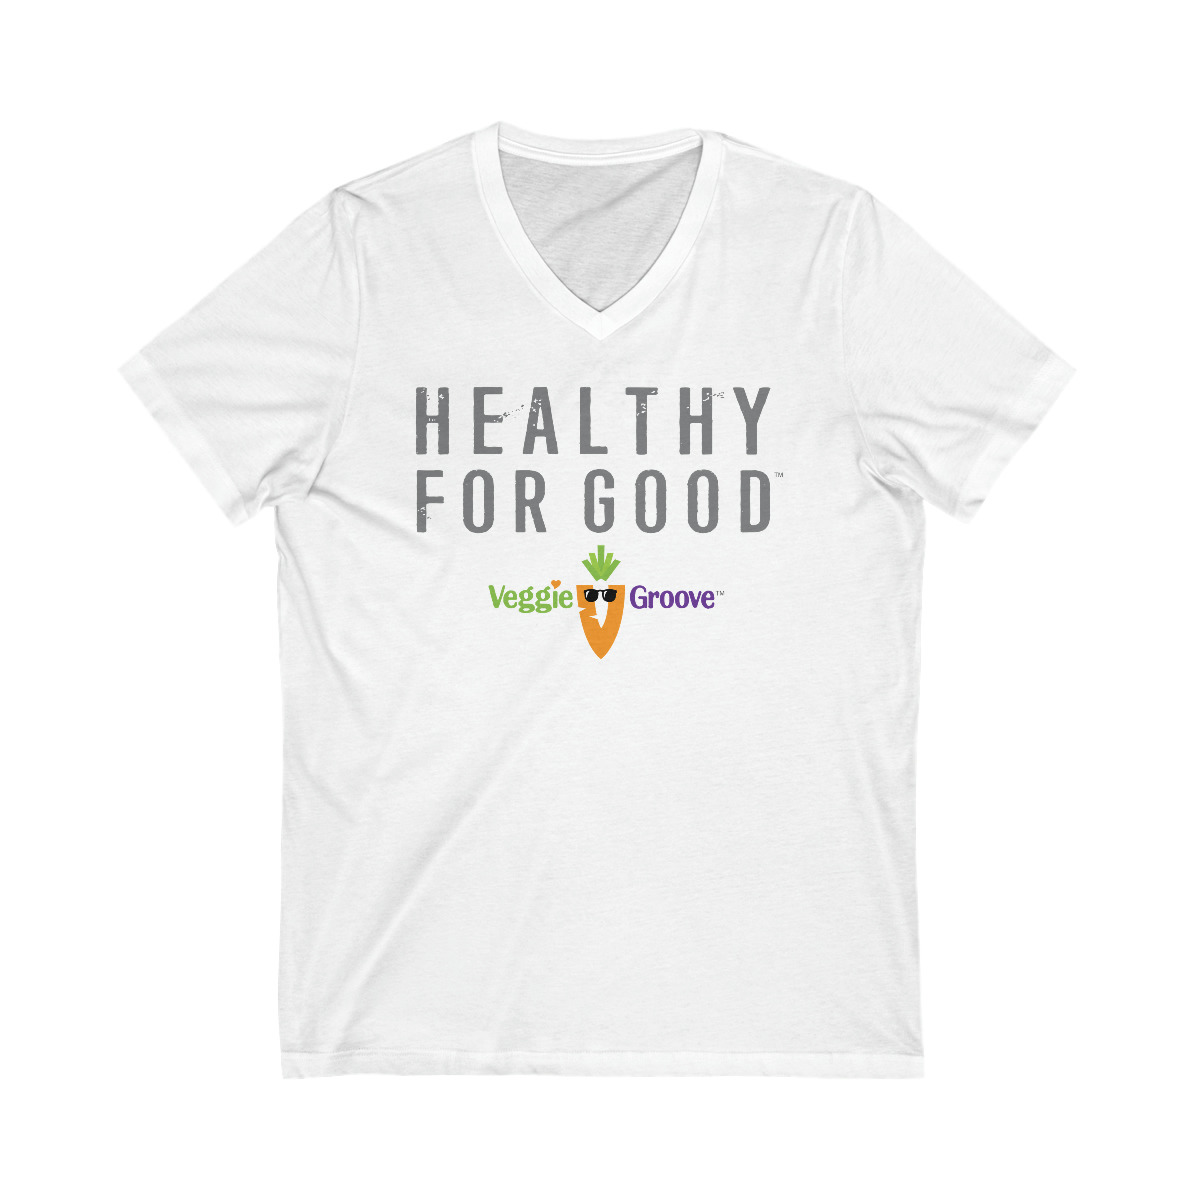 Veggie Groove ‘Healthy for Good’ V-Neck Tee: Where Style Meets Wellness